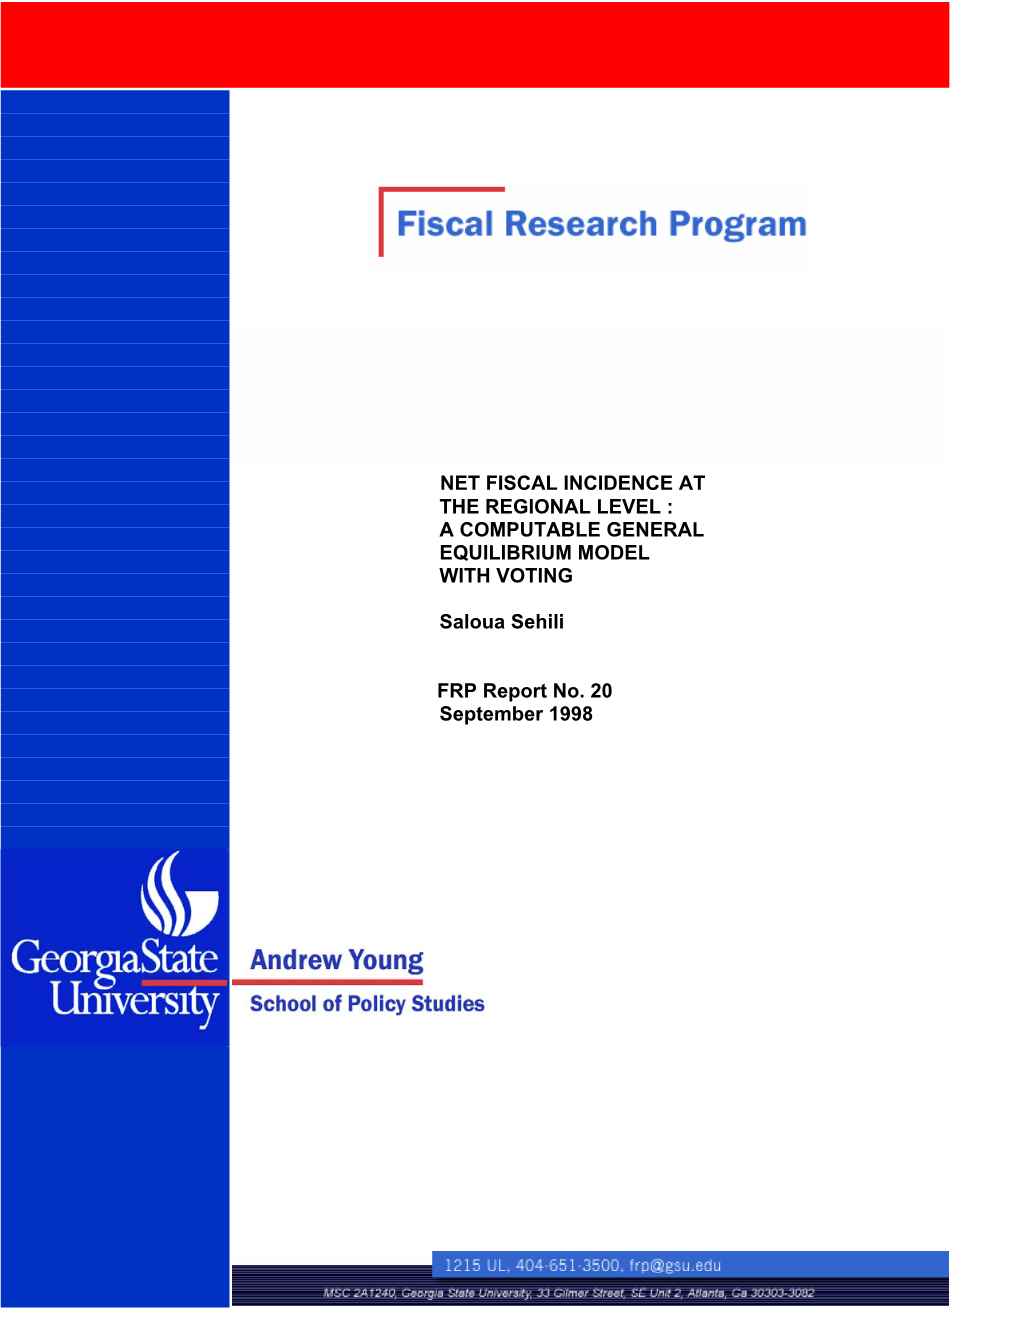 Net Fiscal Incidence at the Regional Level: a Computable General Equilibrium Model with Voting”, School of Policy Studies, Georgia State University, December, 1997